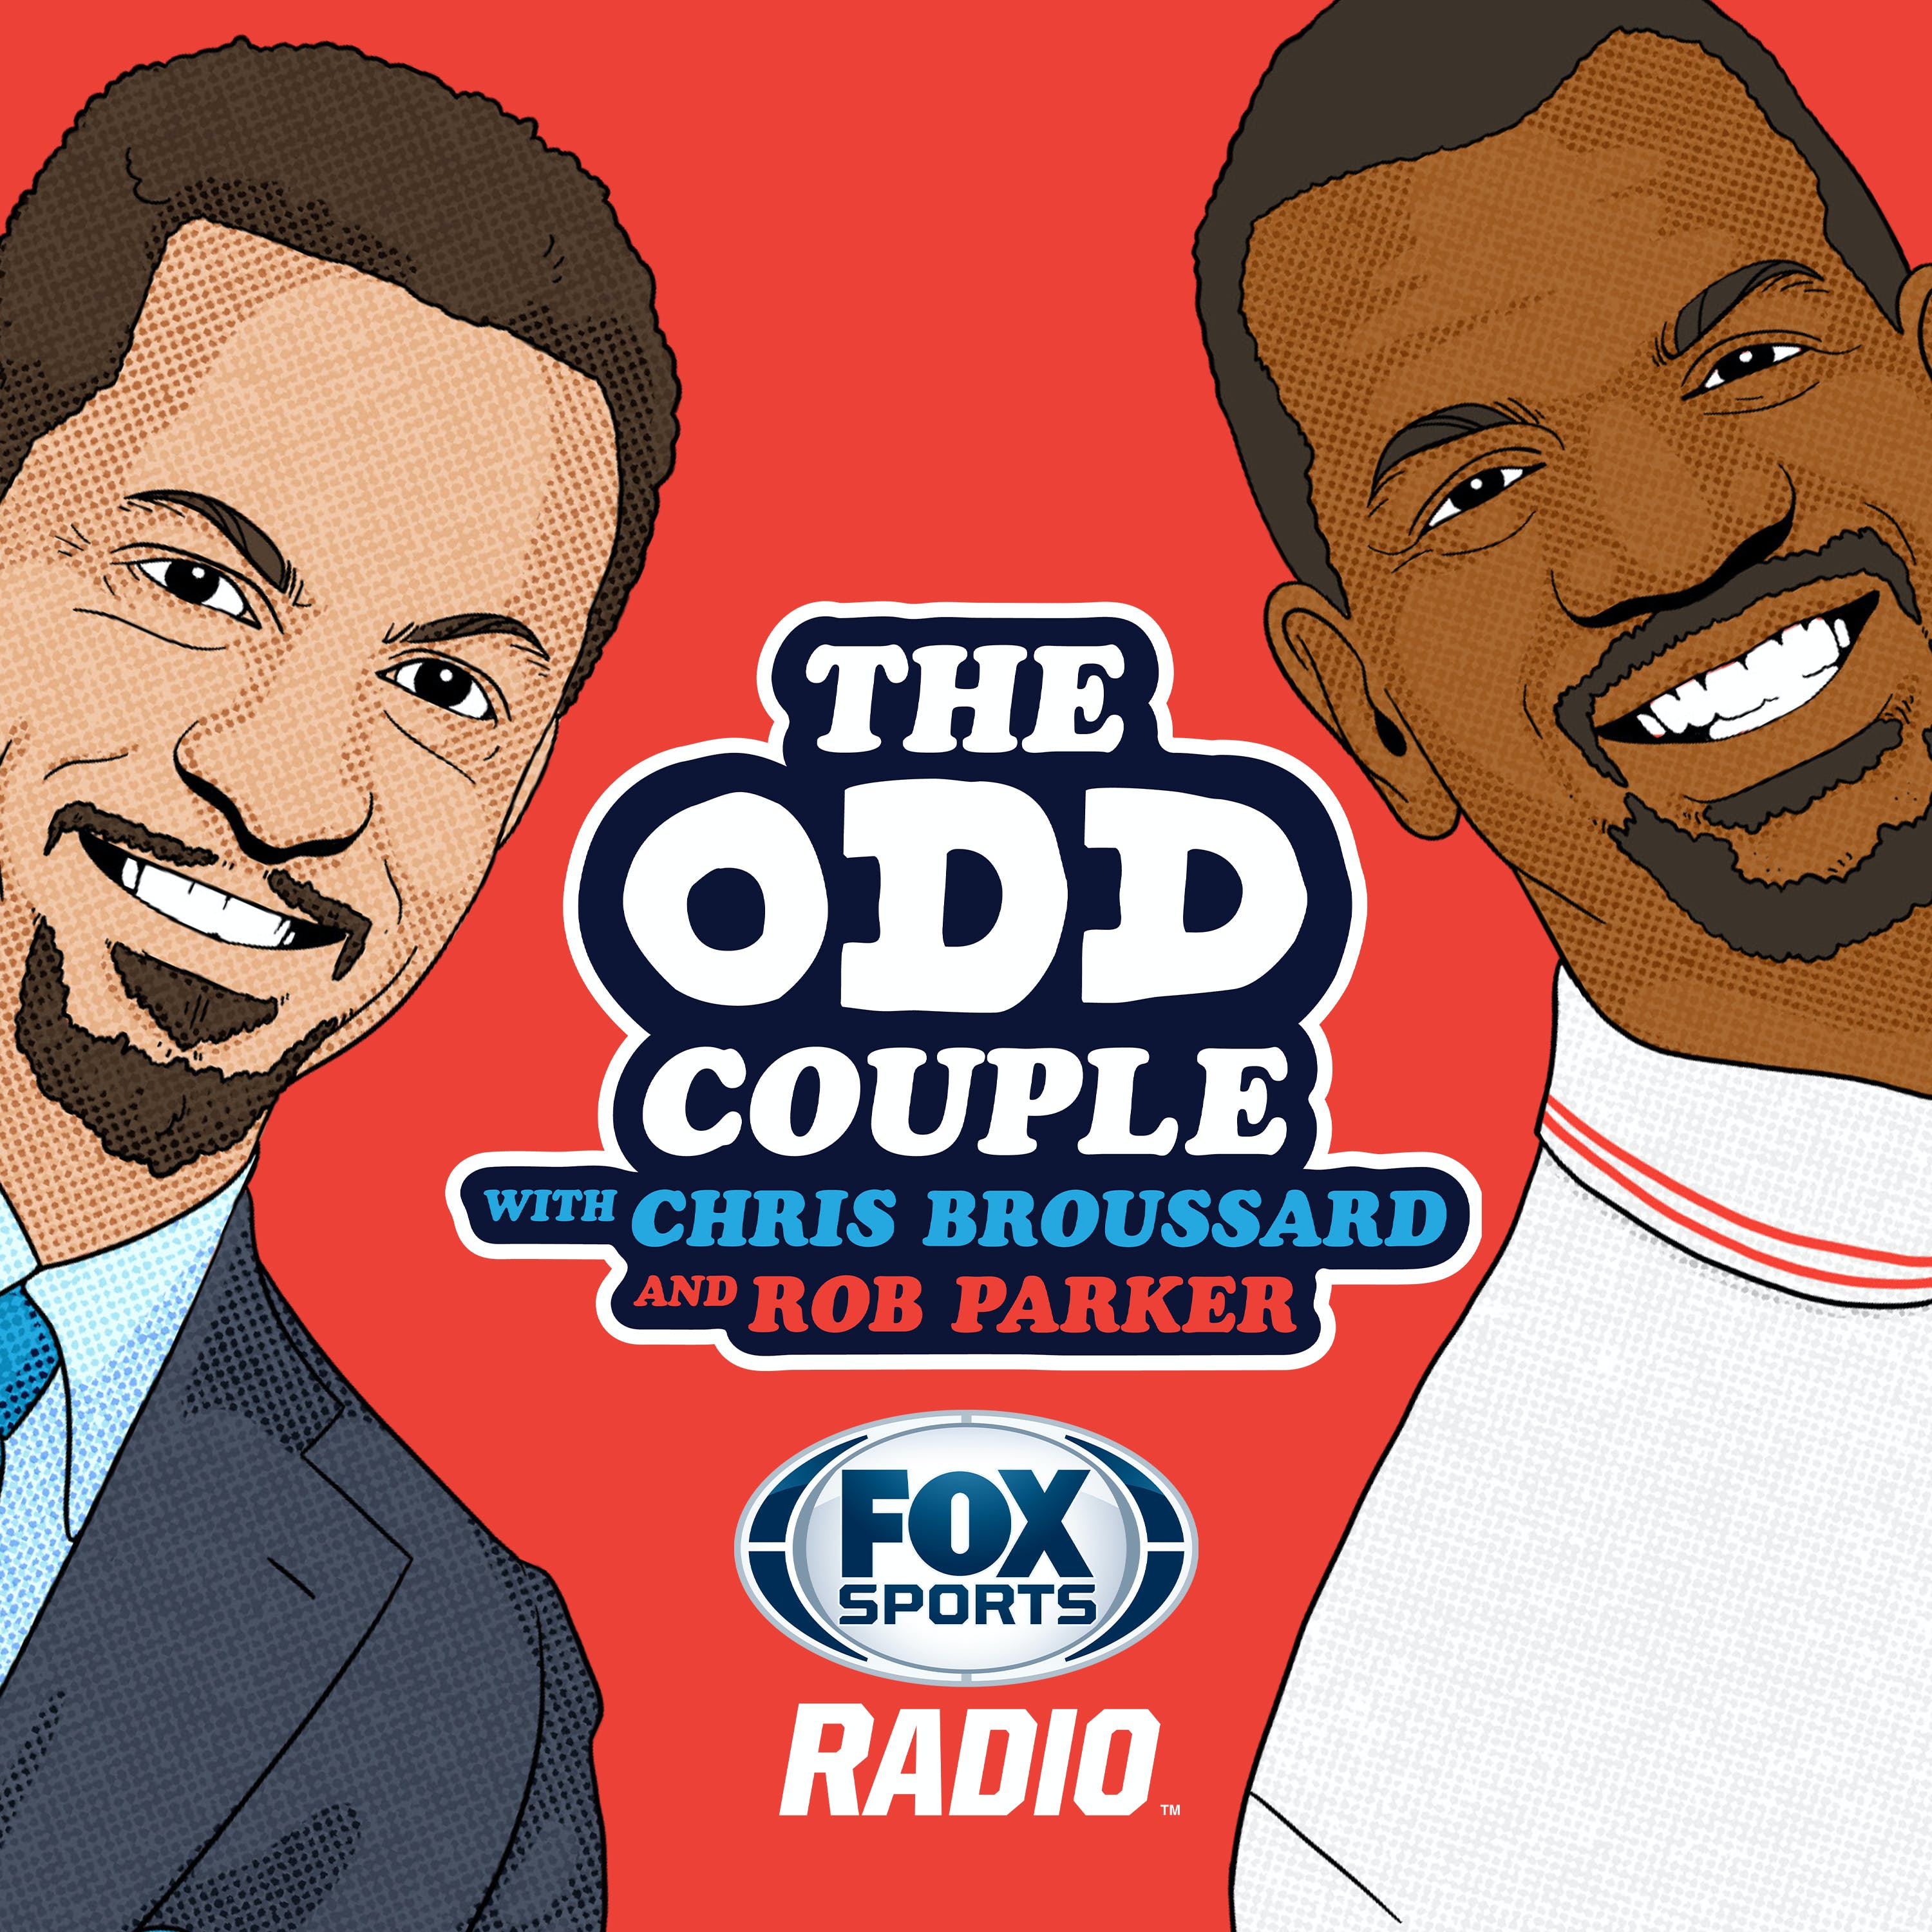 11/30/2021 - Best of The Odd Couple